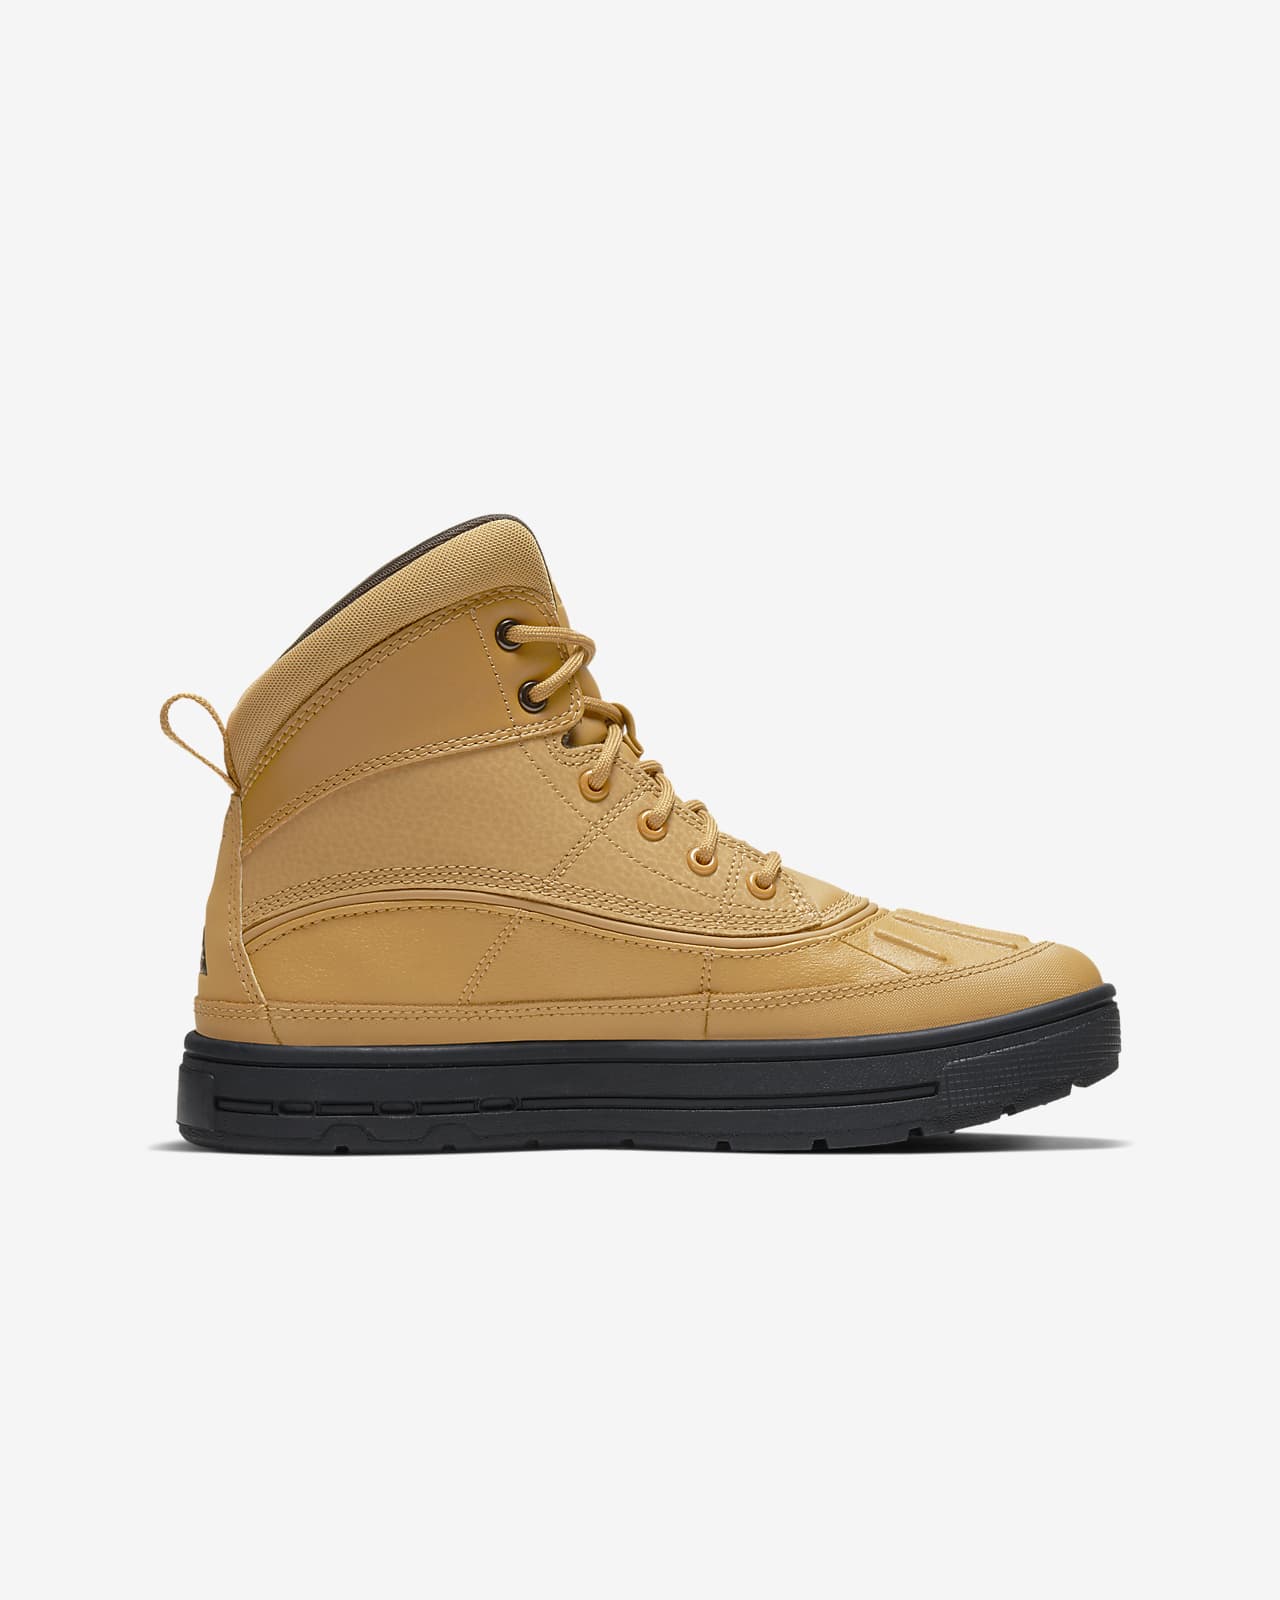 high top nike acg boots